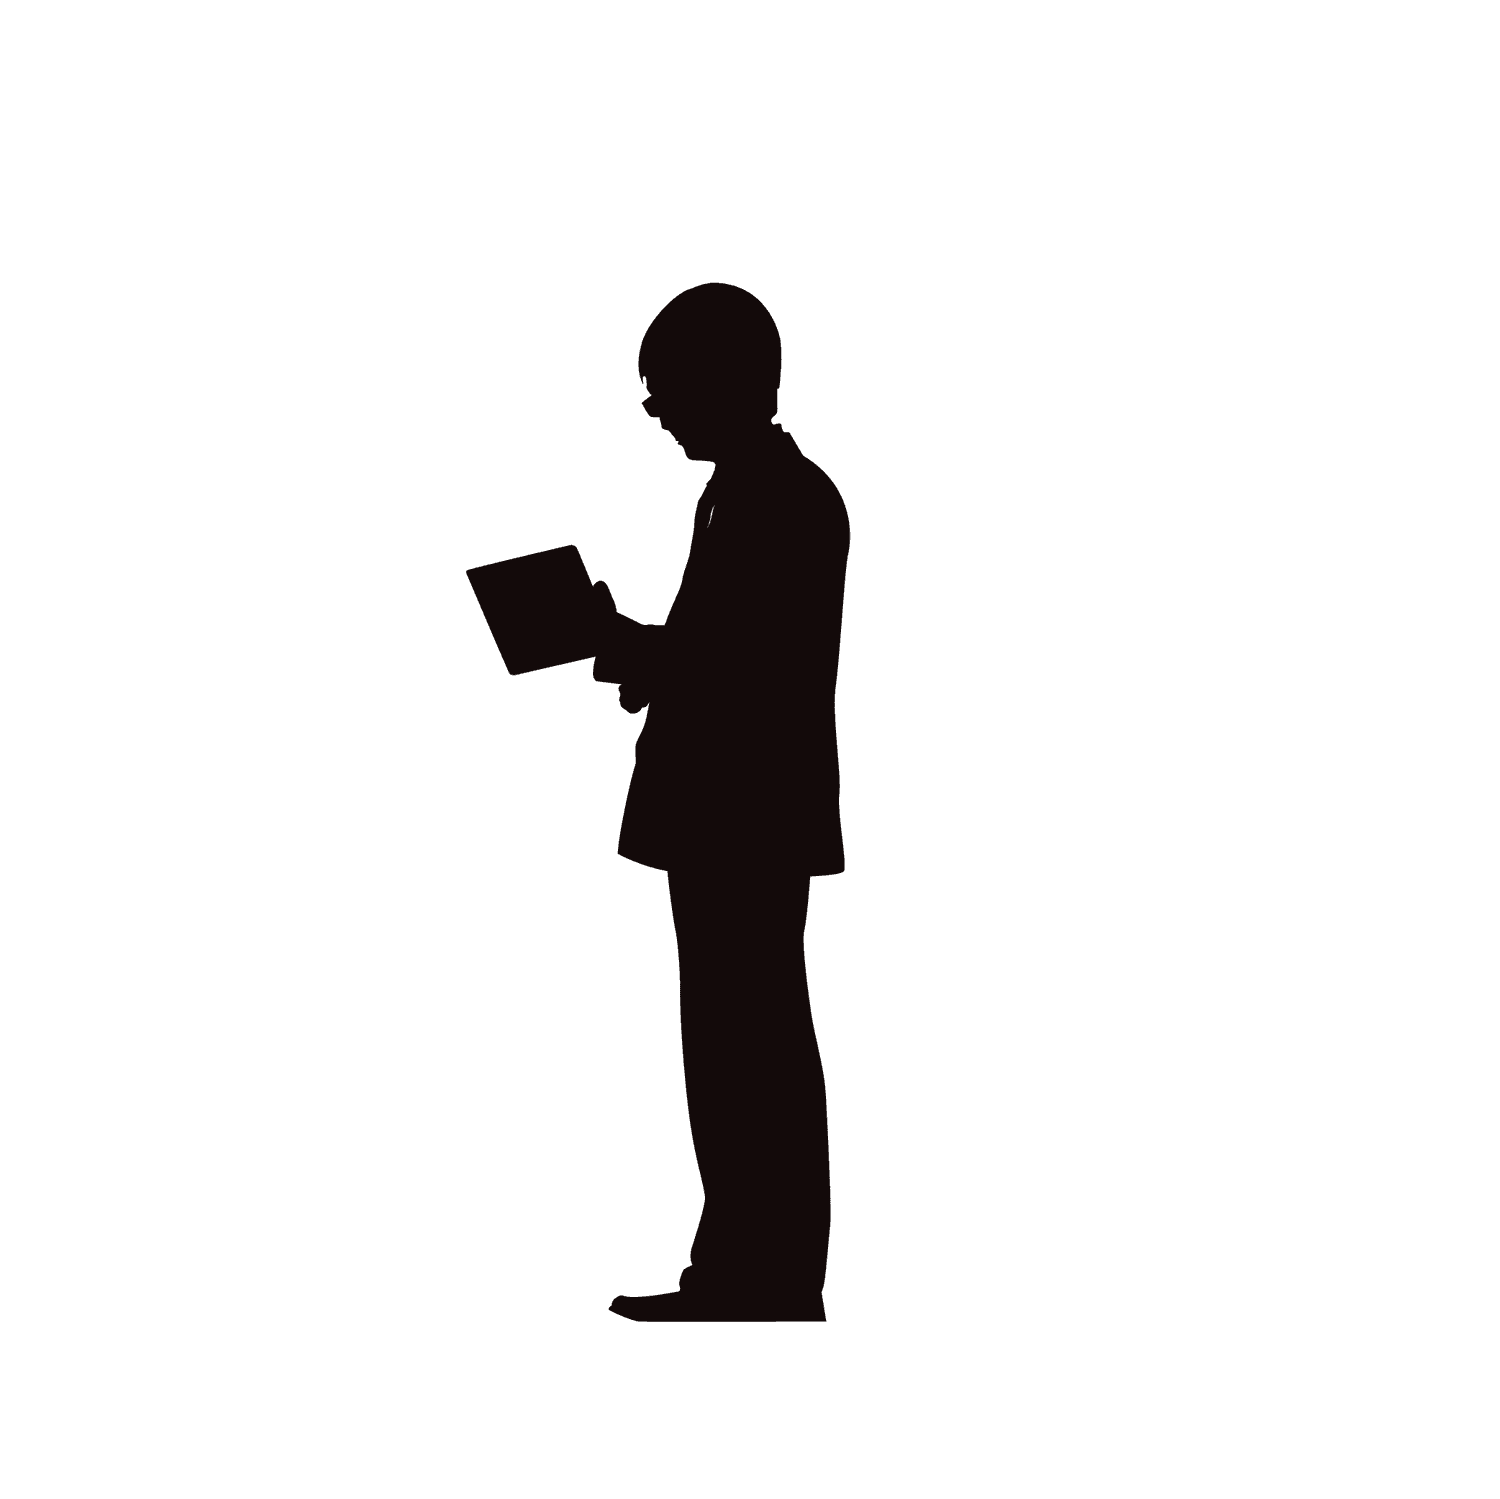 businessman standing silhouette with difference pose